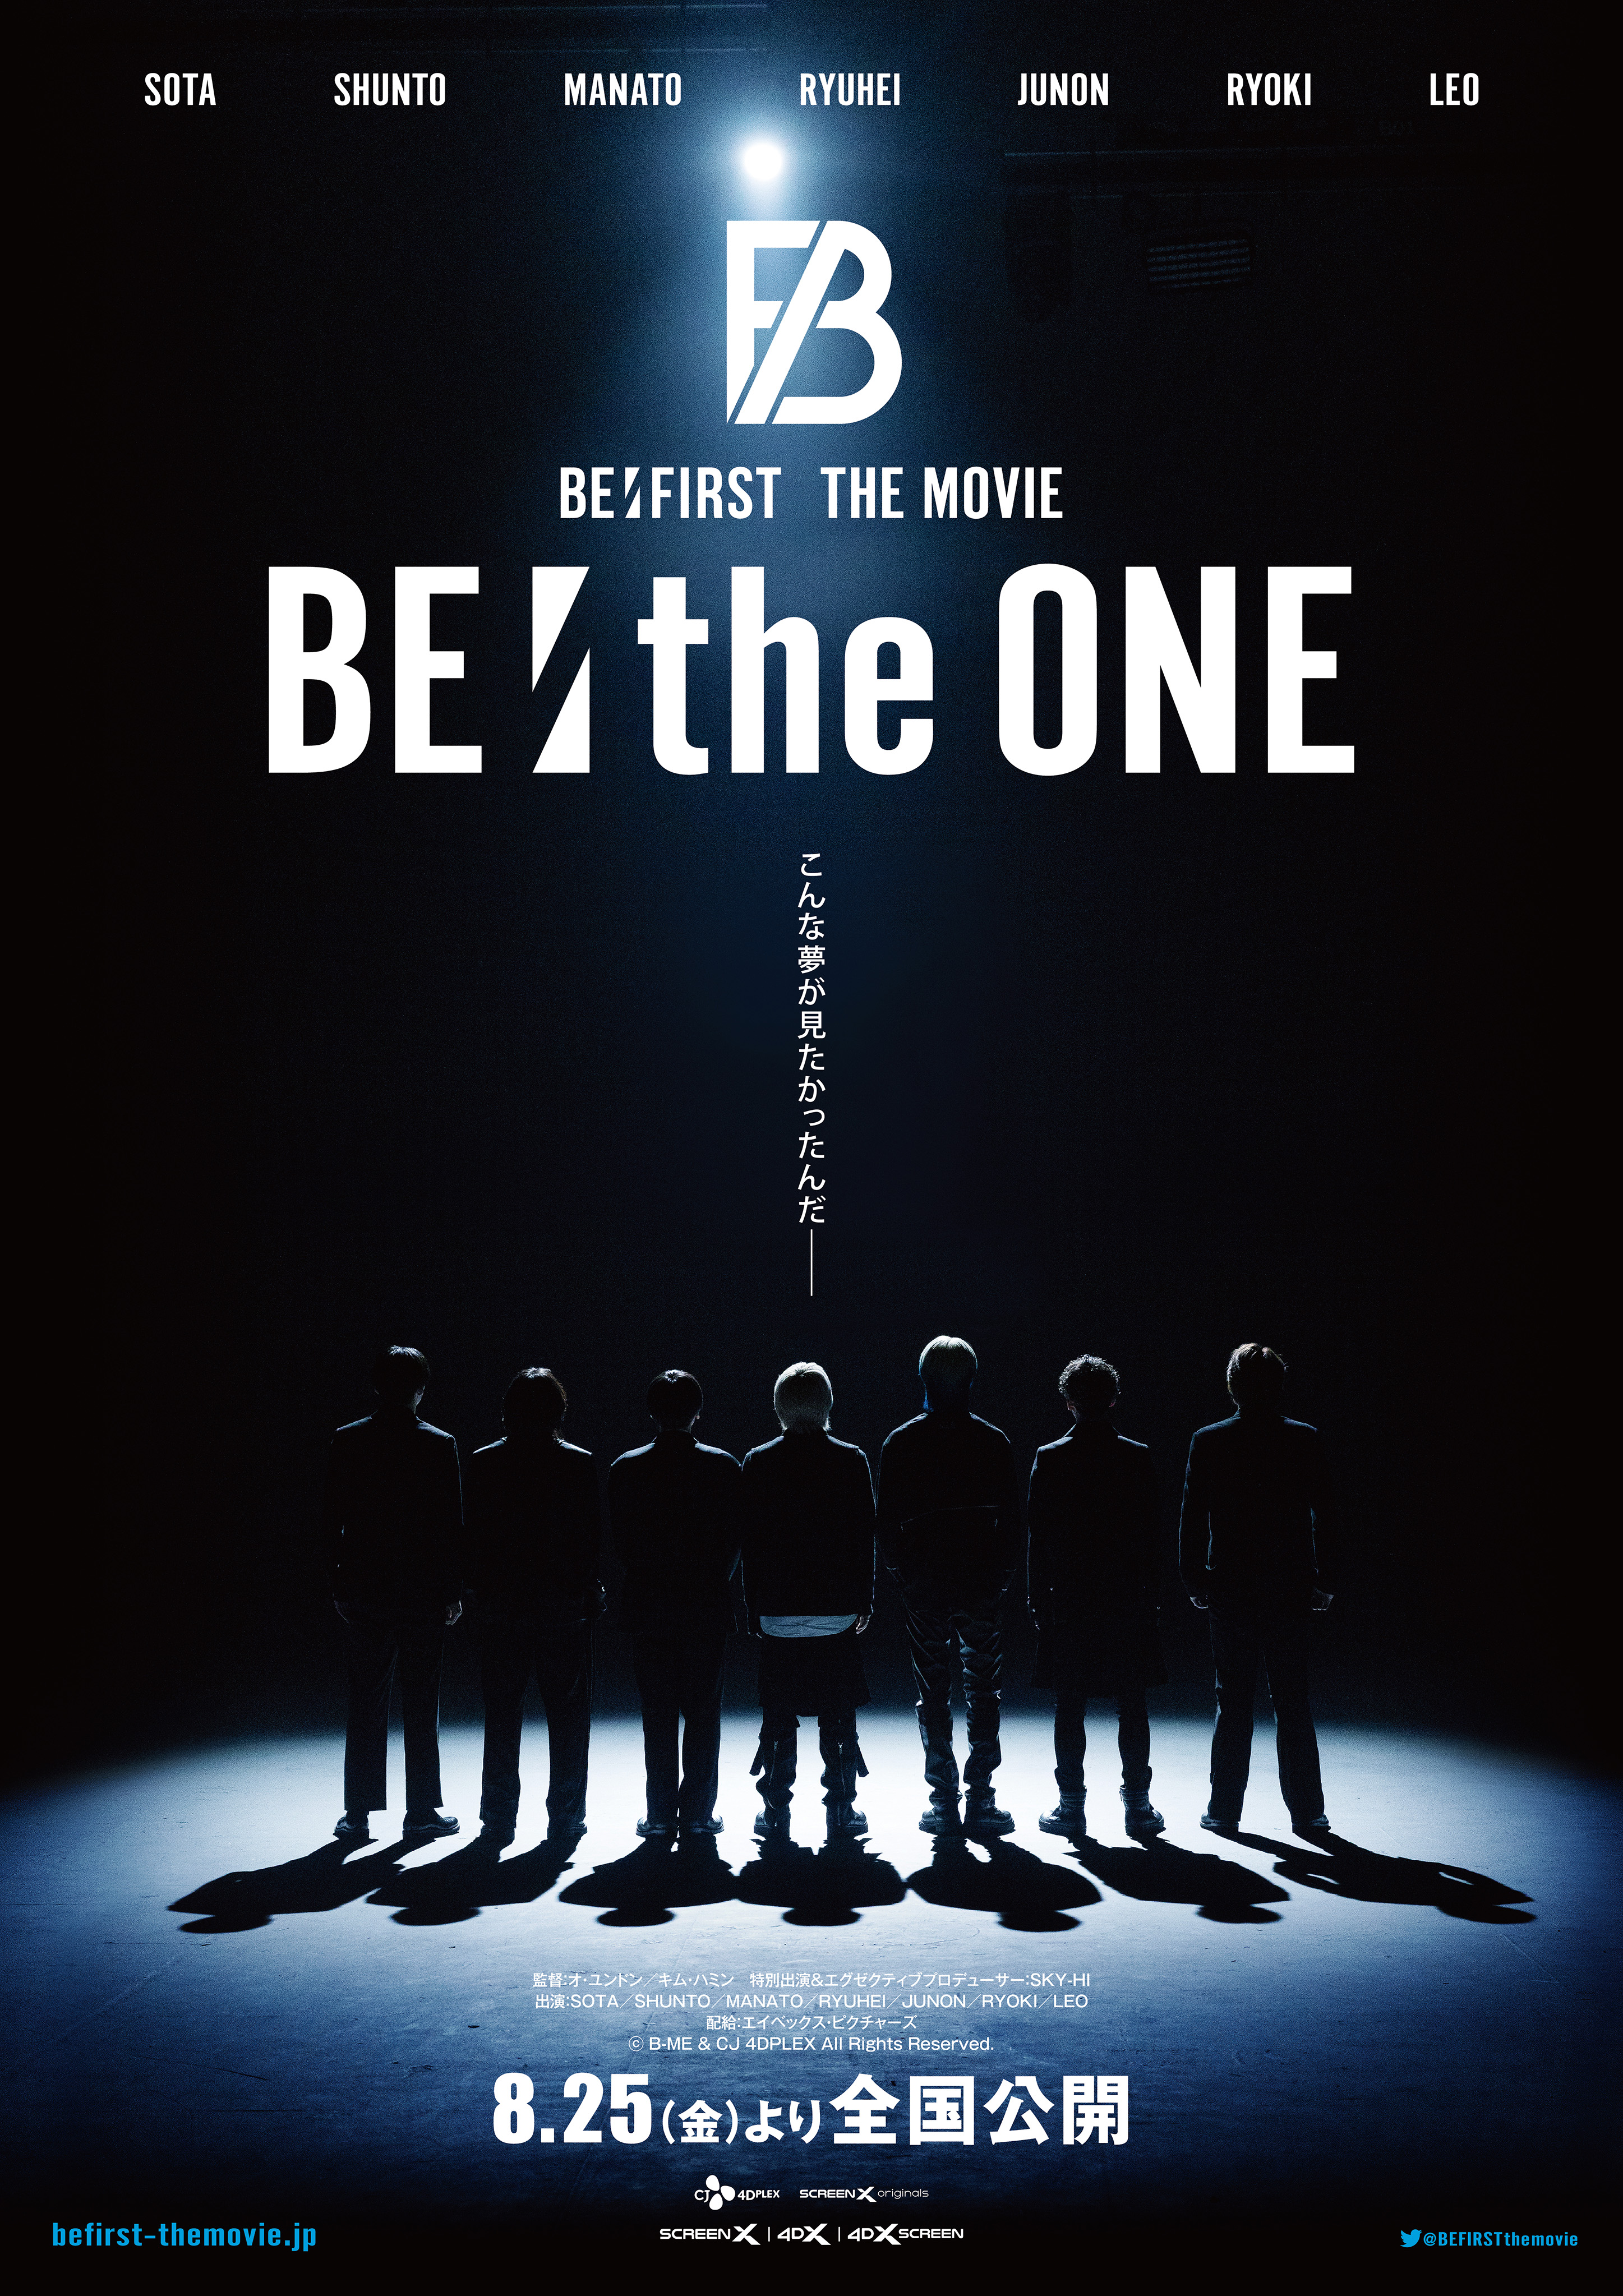 BE:FIRSTの初ライブドキュメンタリー映画「BE:the ONE」ポスタービジュアル